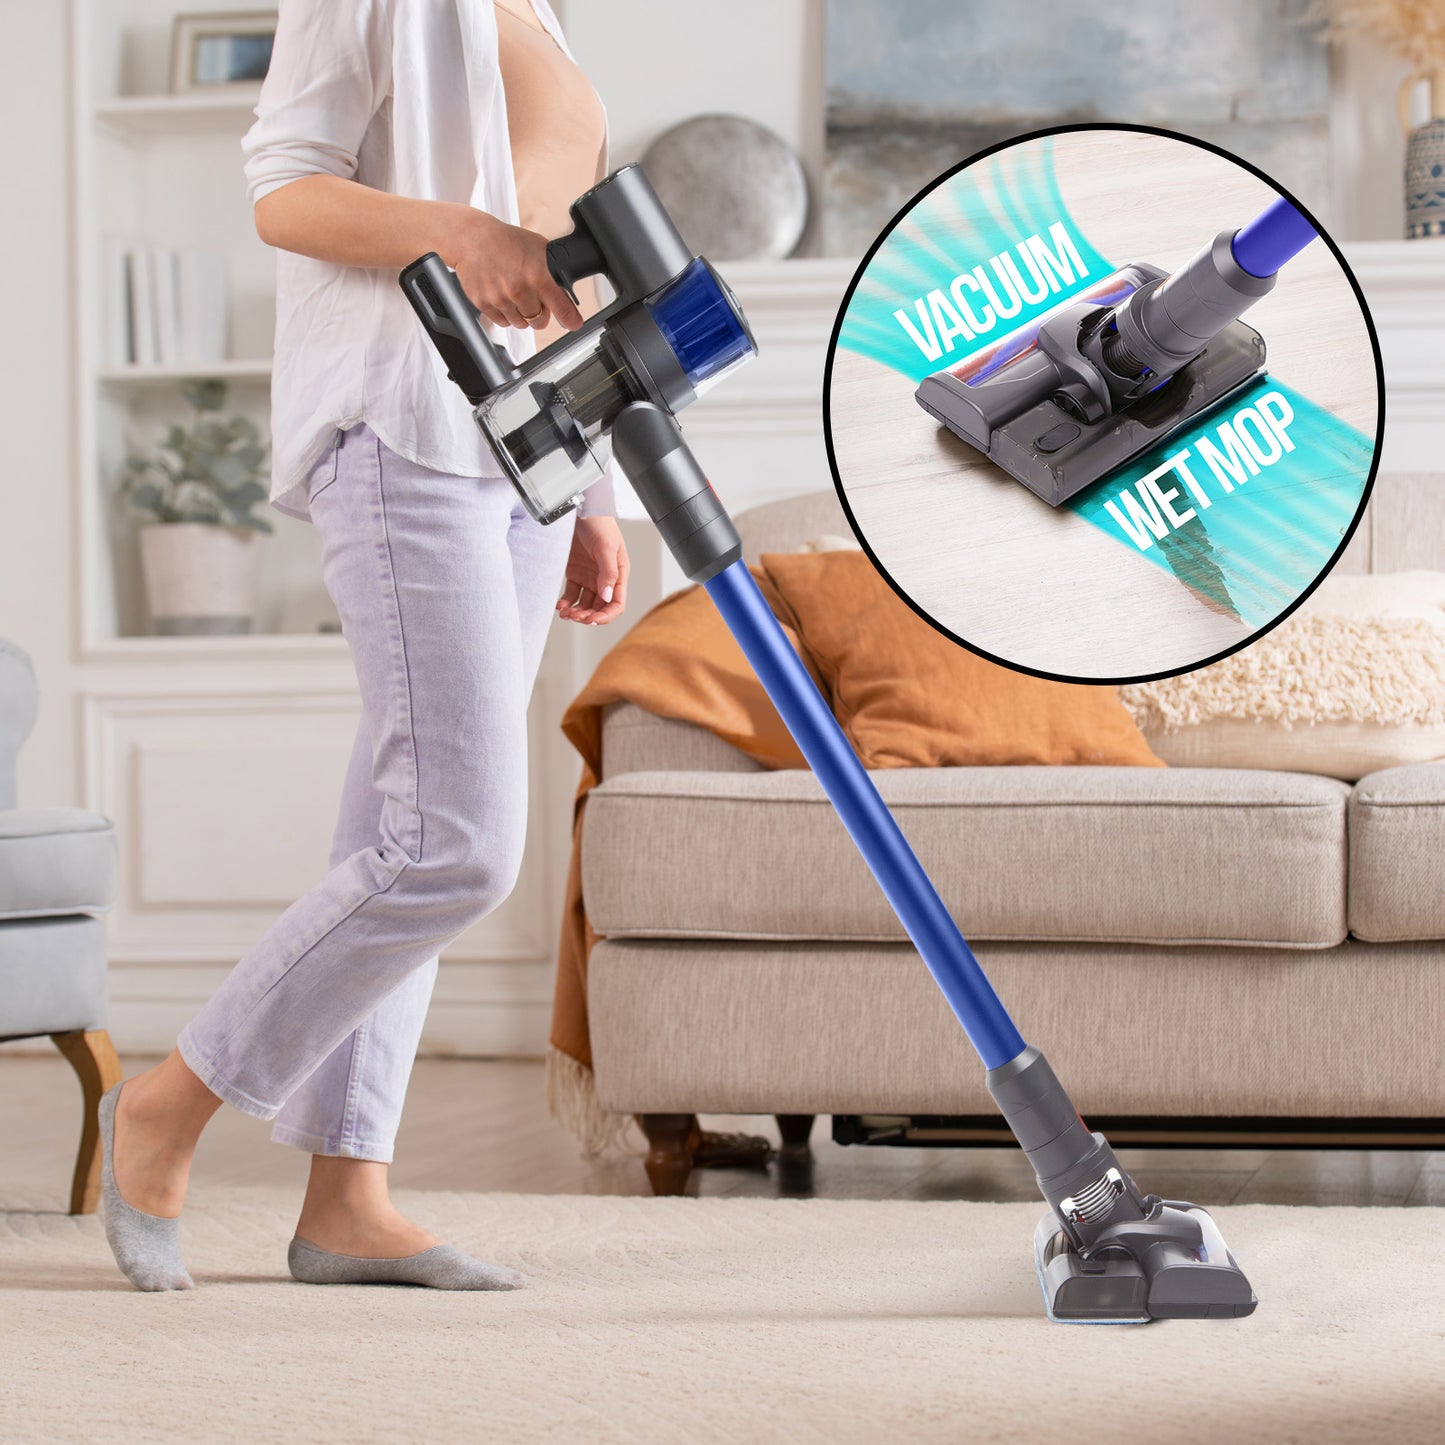 MyGenie H20 PRO Wet Mop 2-IN-1 Cordless Stick Vacuum Cleaner Handheld Recharge - Blue